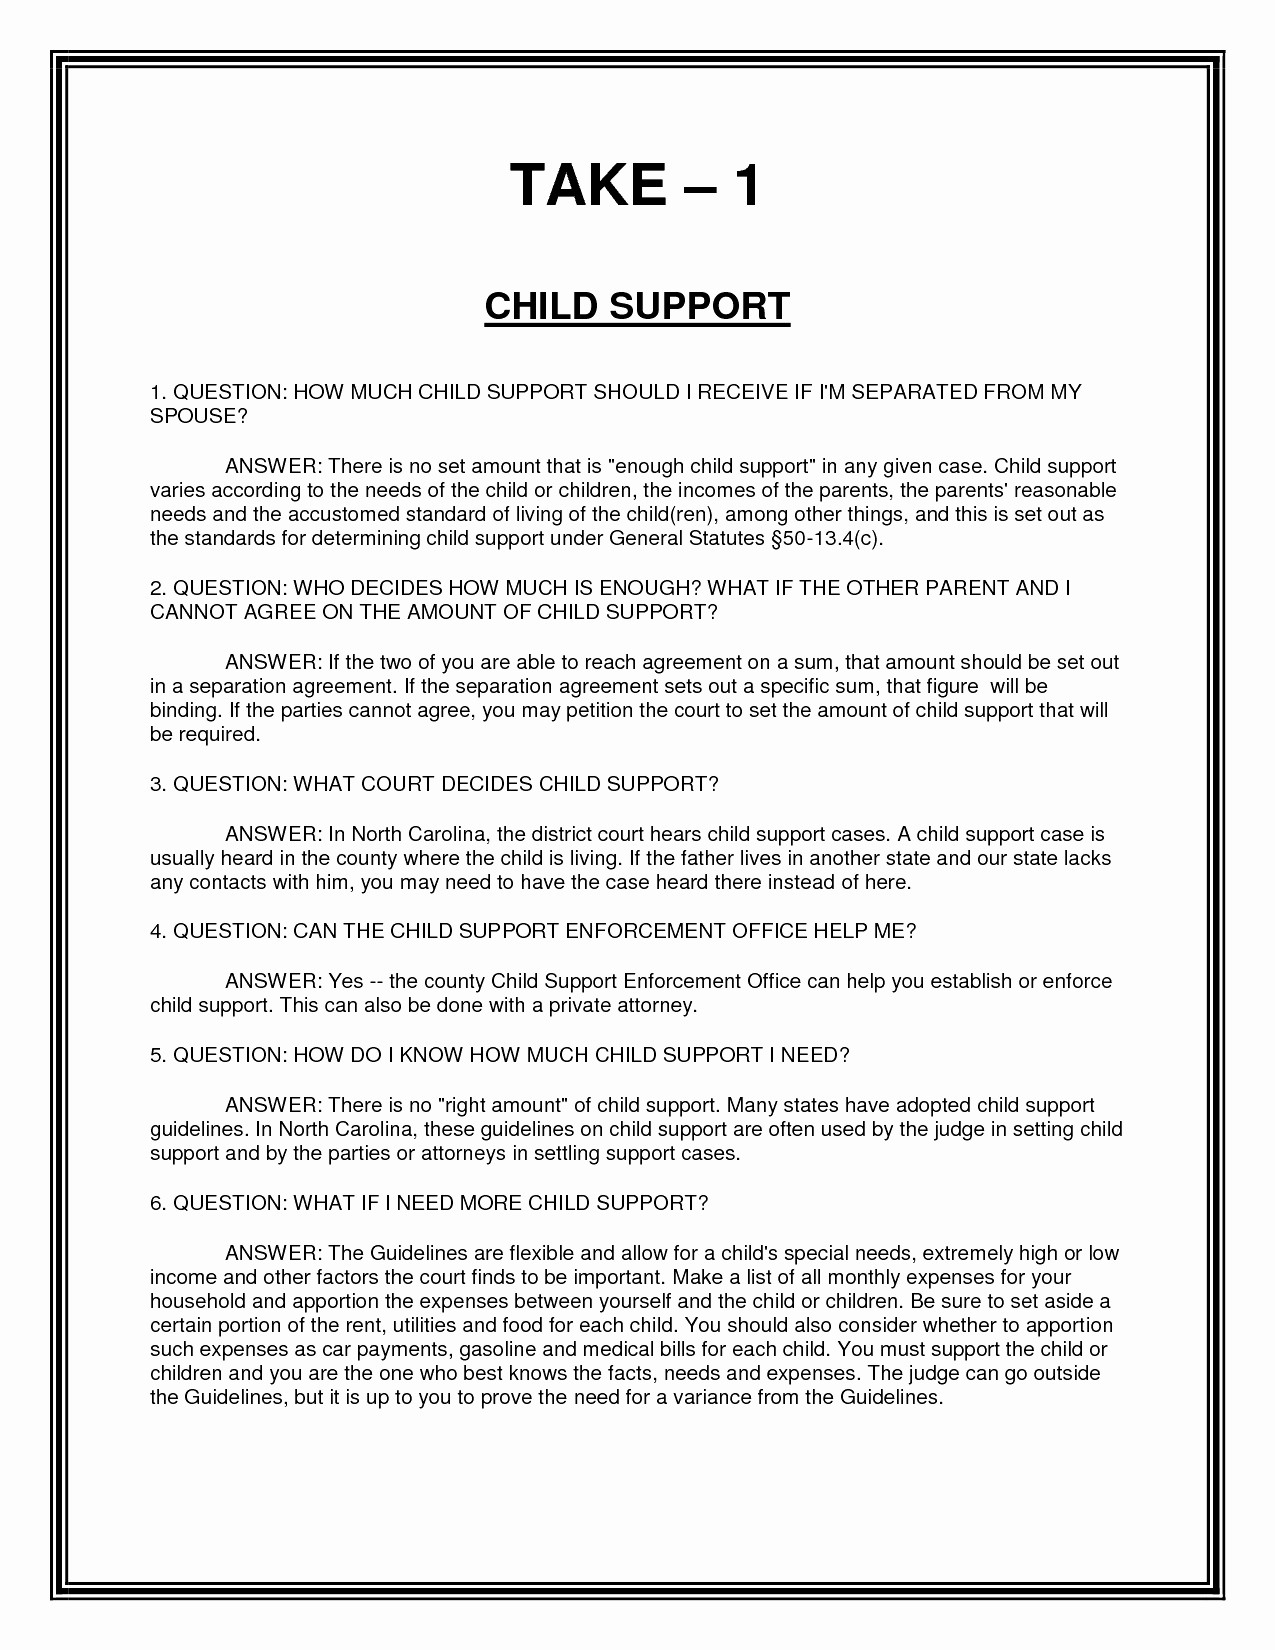 Sample Child Support Agreement Between Parents Lovely Document